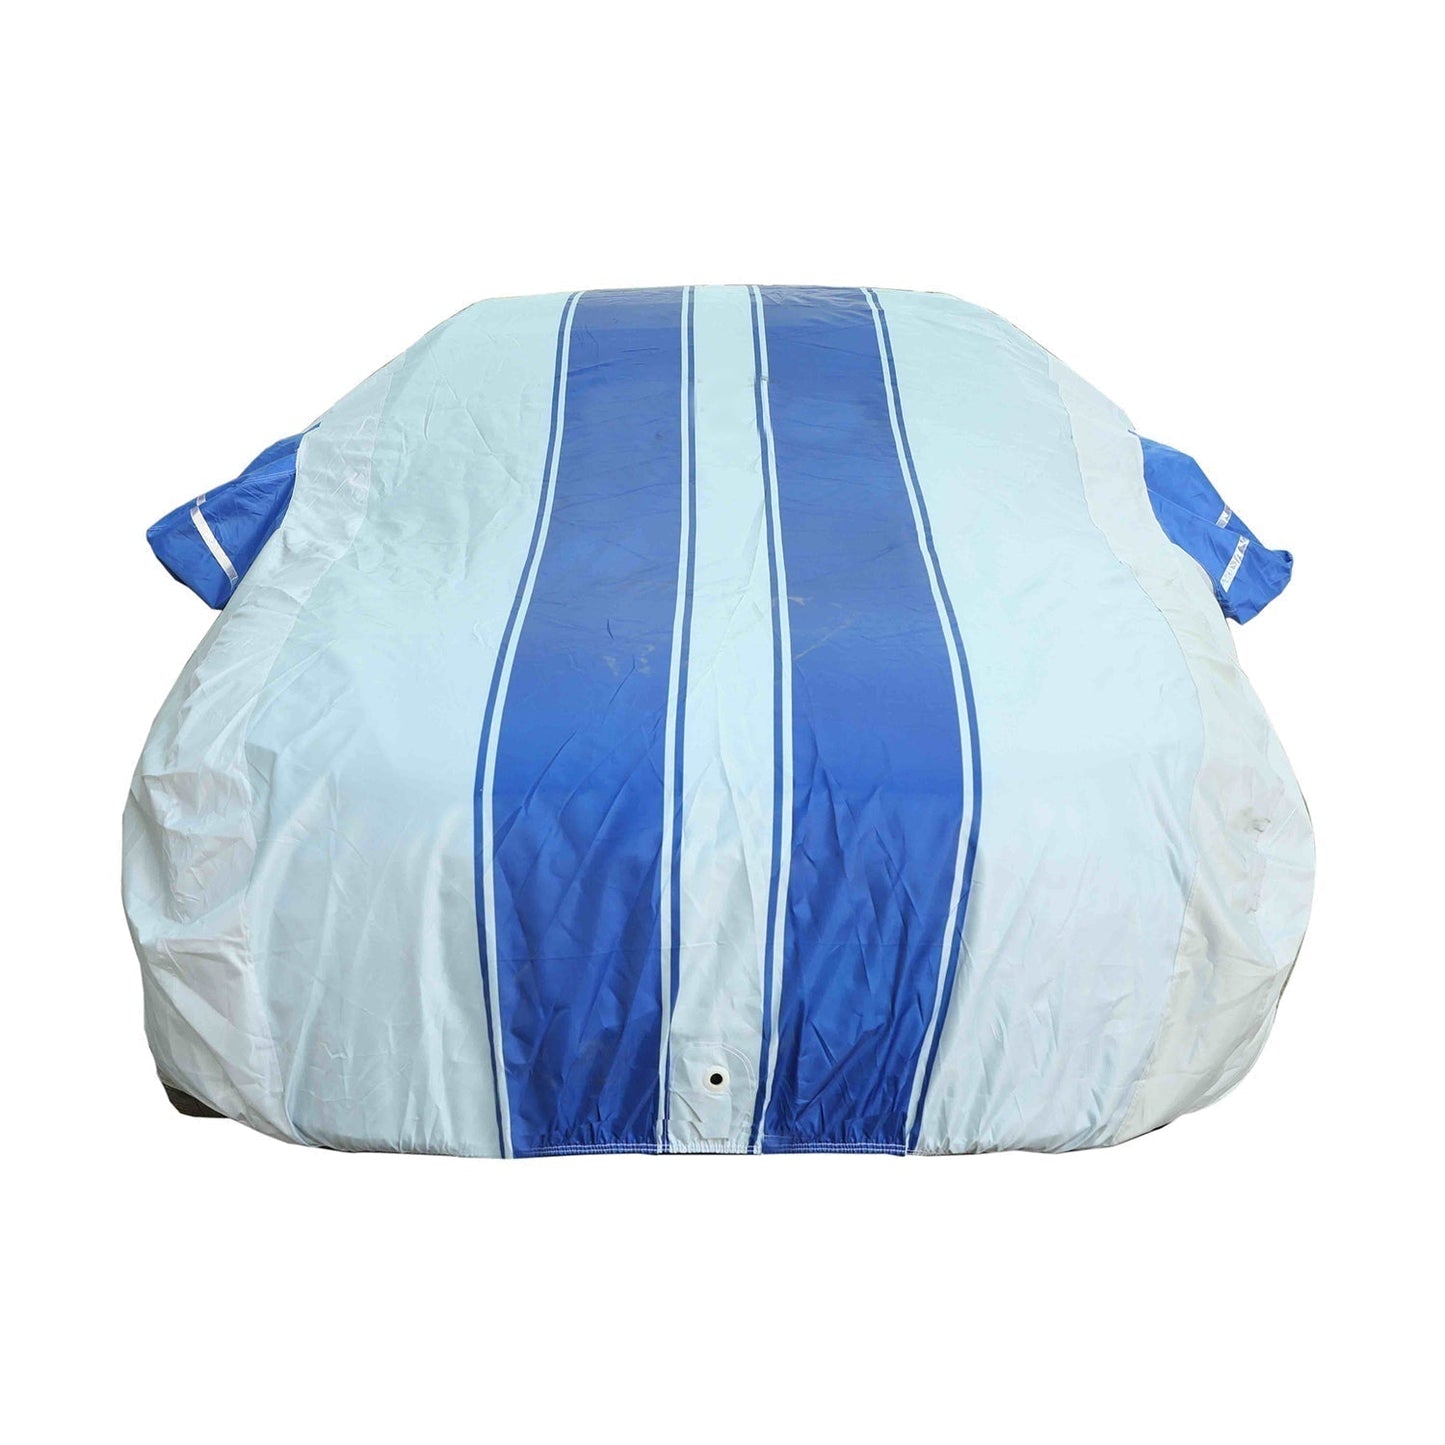 Oshotto 100% Blue dustproof and Water Resistant Car Body Cover with Mirror Pockets For Volkswagen Polo